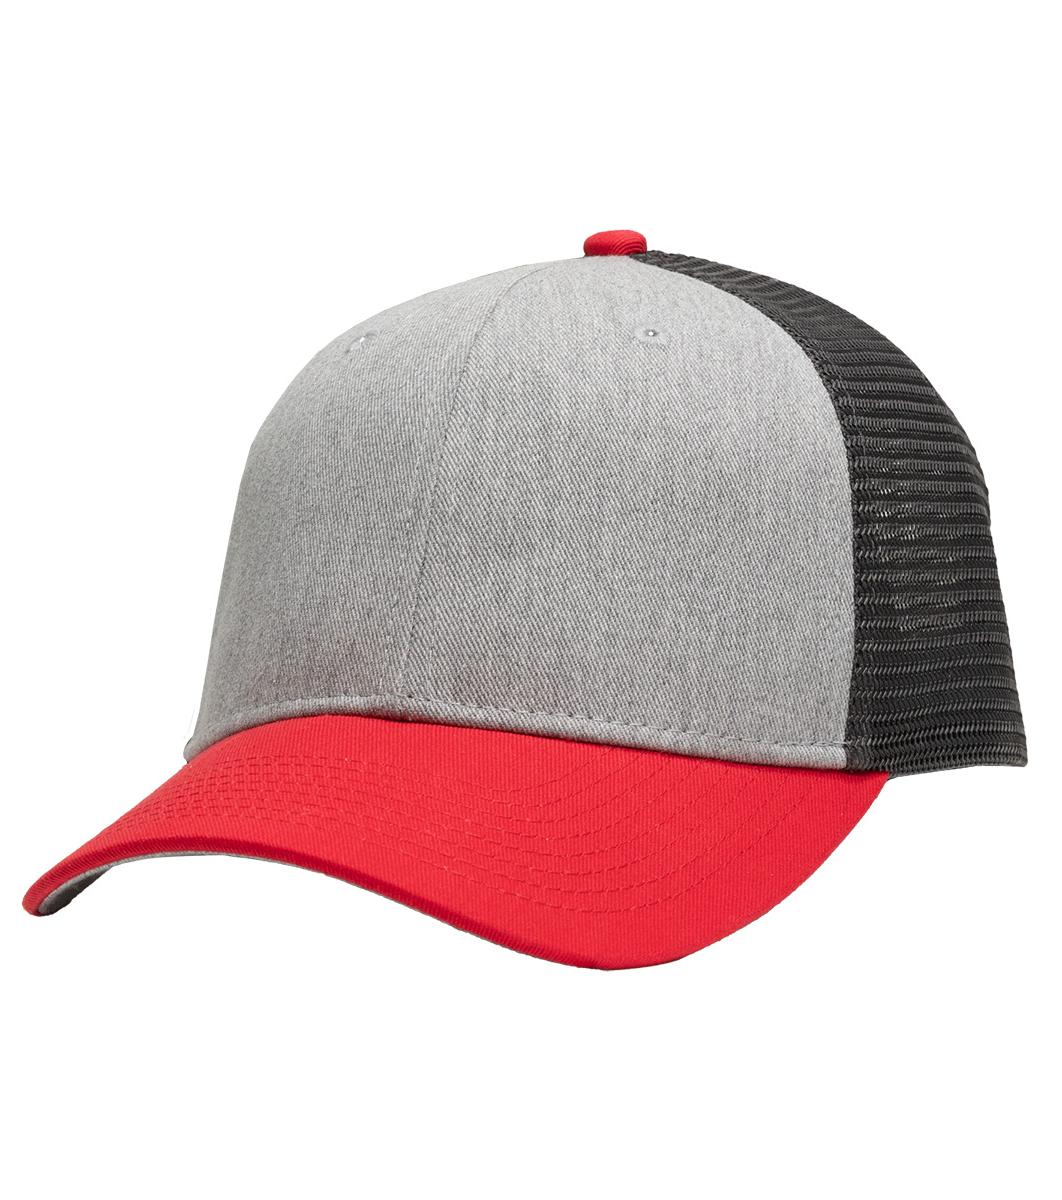 click to view Heather Grey/ Charcoal/ Red